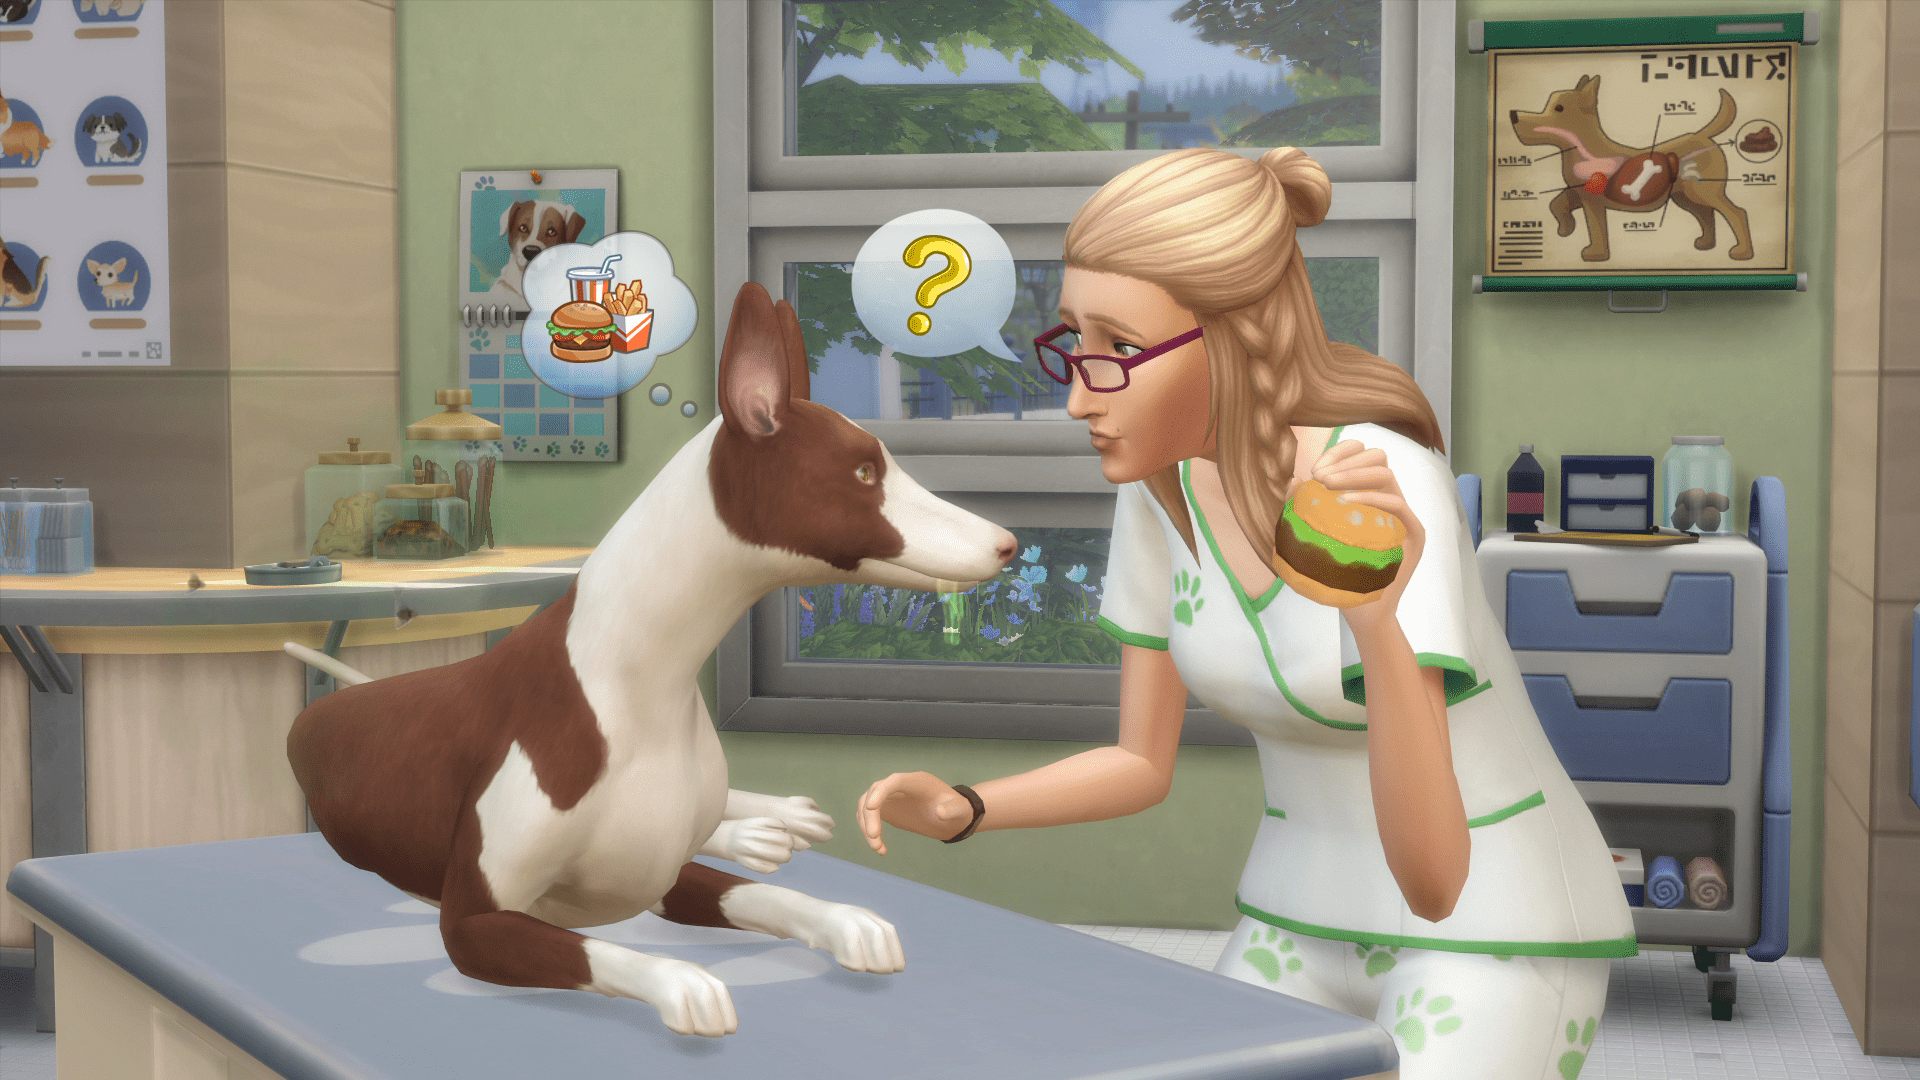 will we get new traits with the sims 4 cats and dogs?